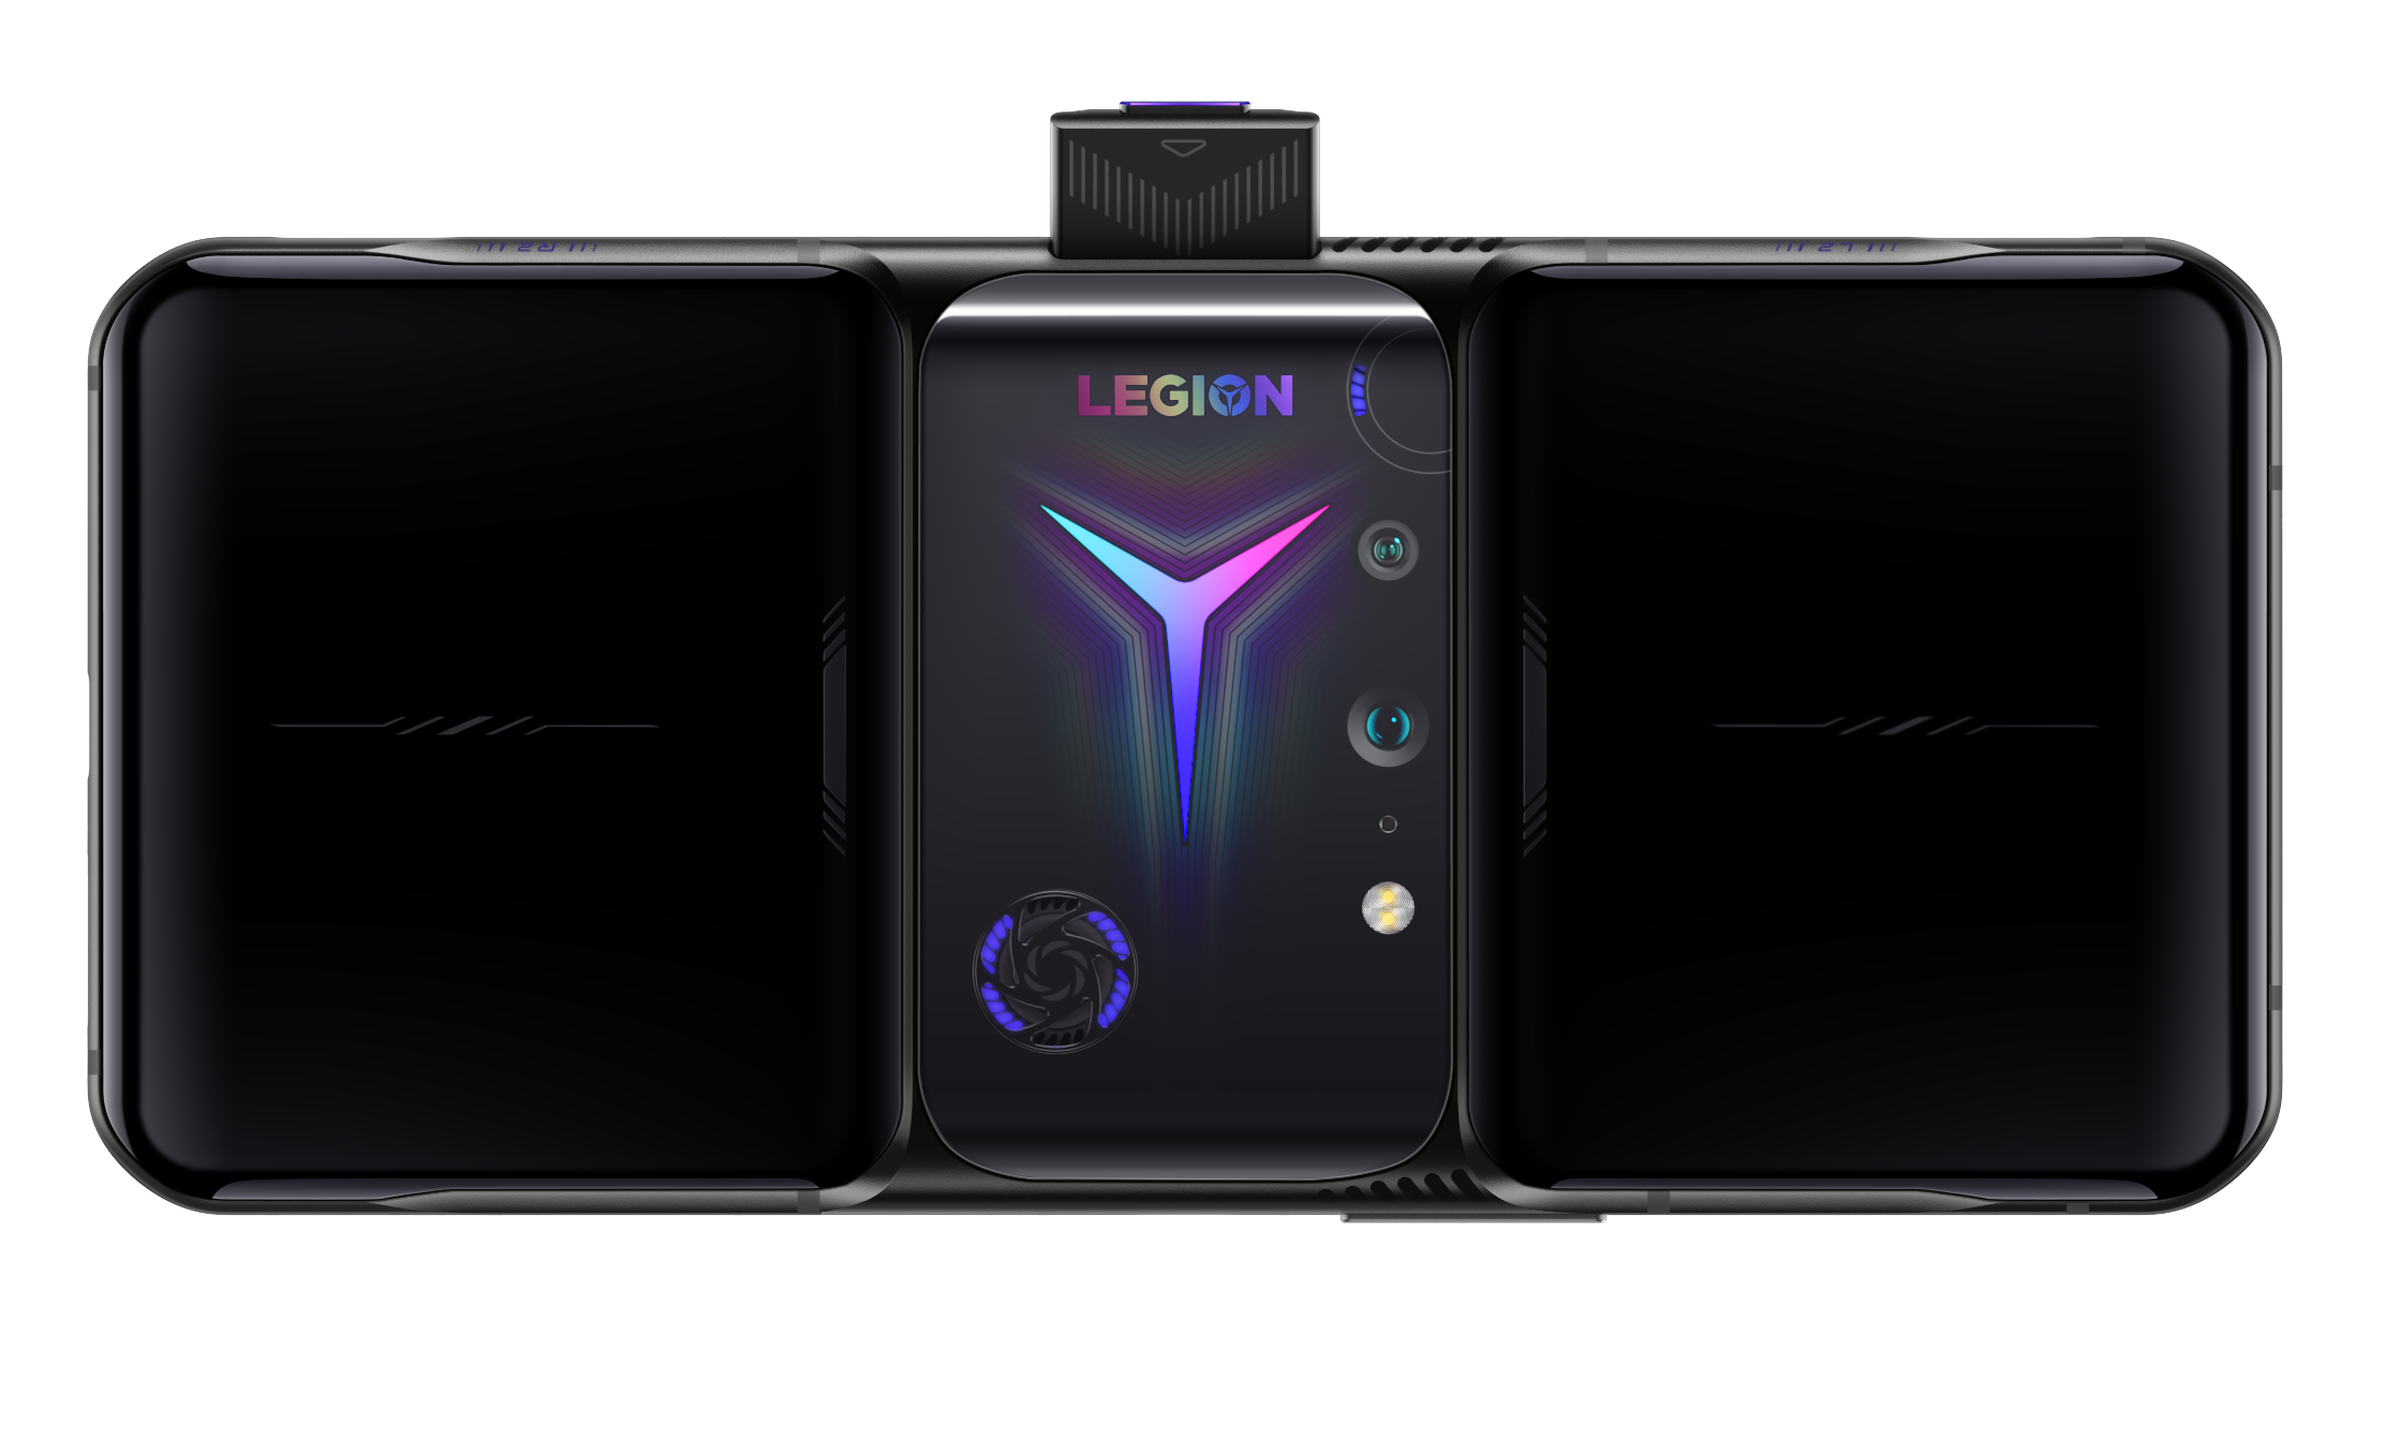 The Legion Phone Duel 2’s new fan-centered design in black.